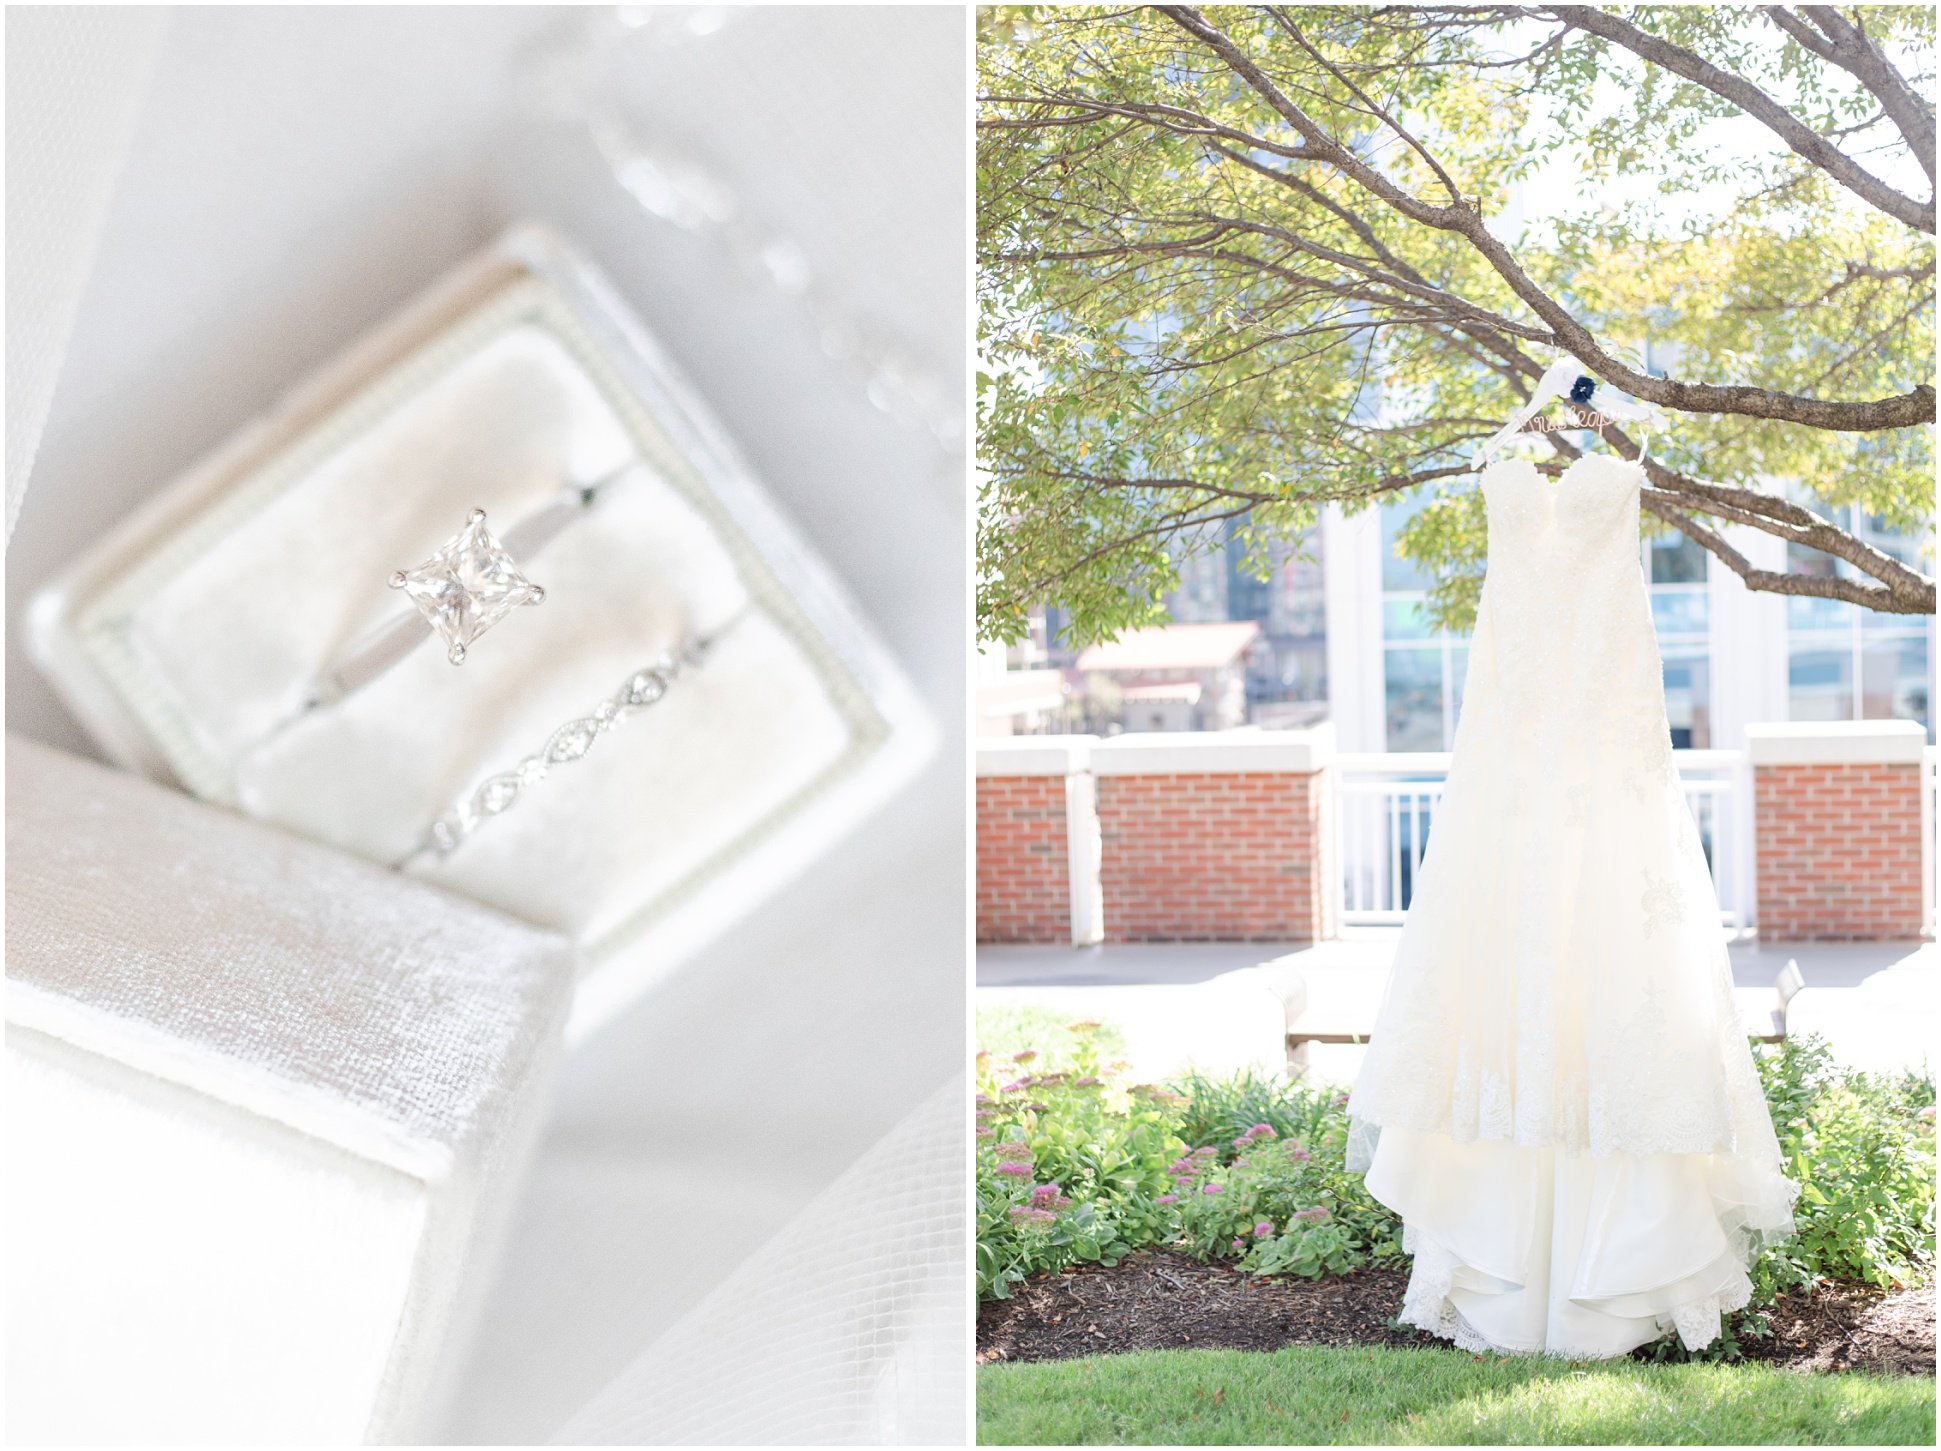 A Square diamond ring in the Mrs. Box, and a sweetheart wedding dress hanging from a tree